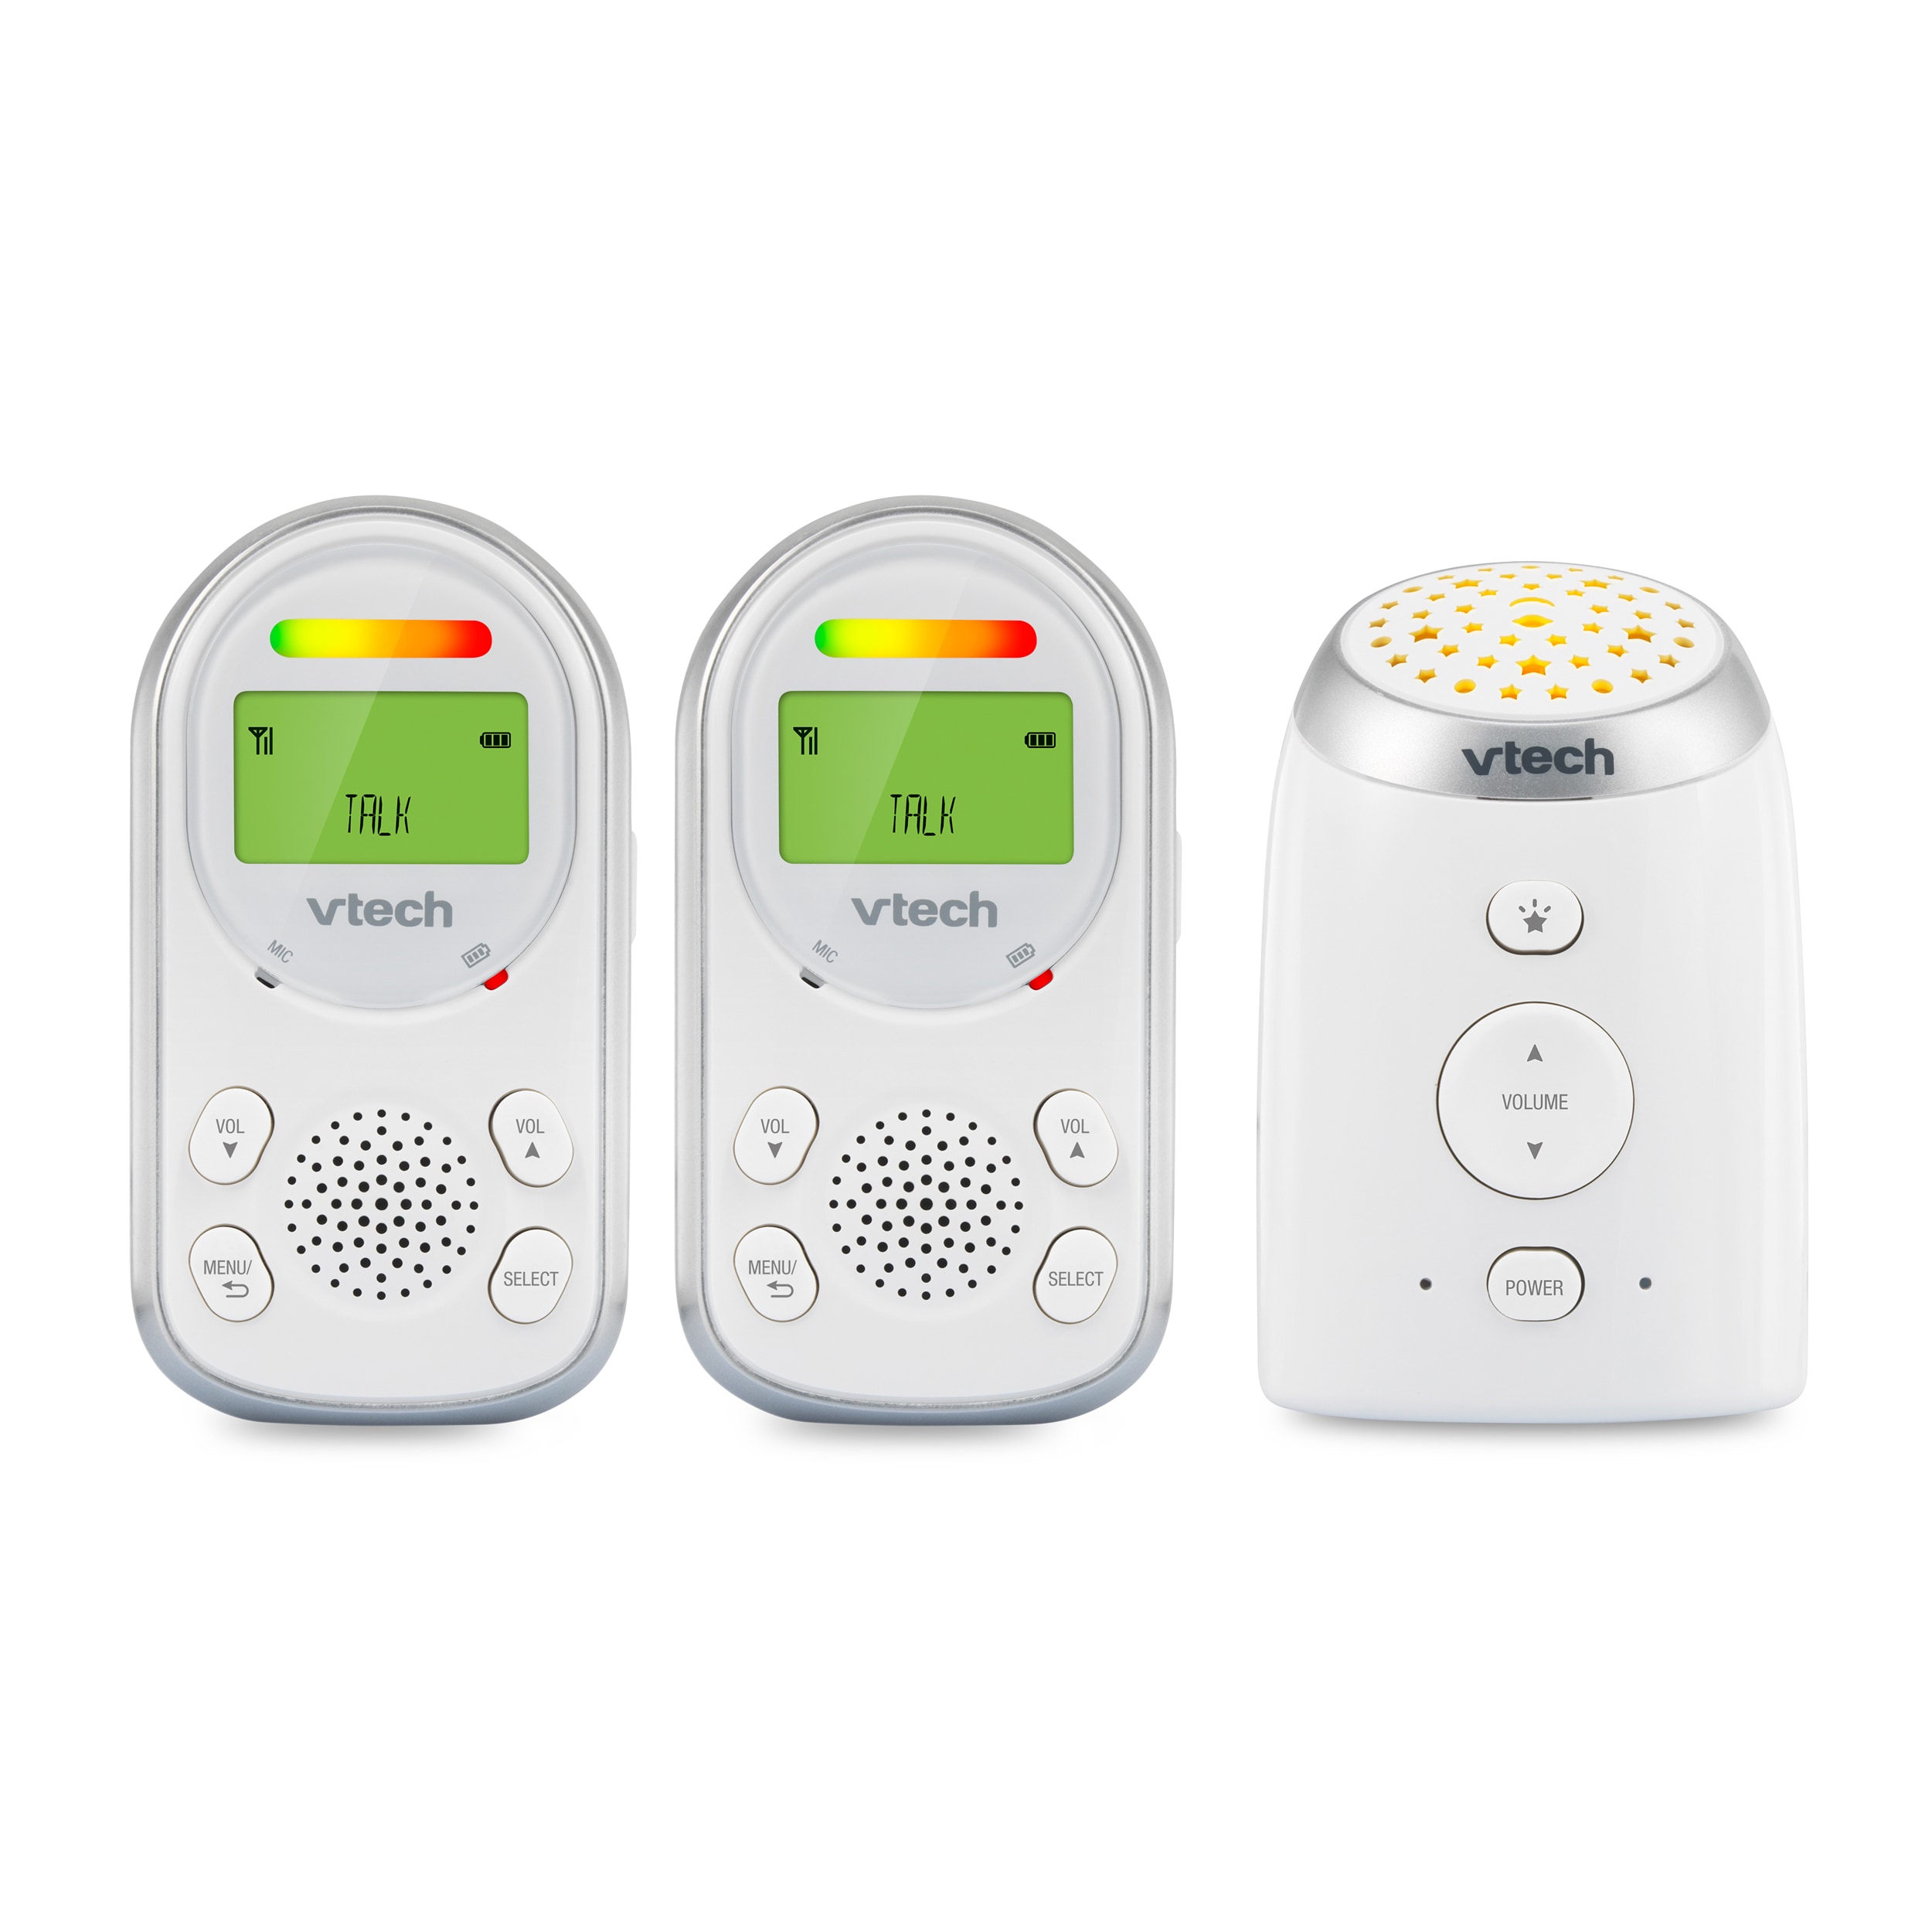 VTech DM111 Audio Baby Monitor W/ up to 1,000 ft of Range 5-Level Sounds